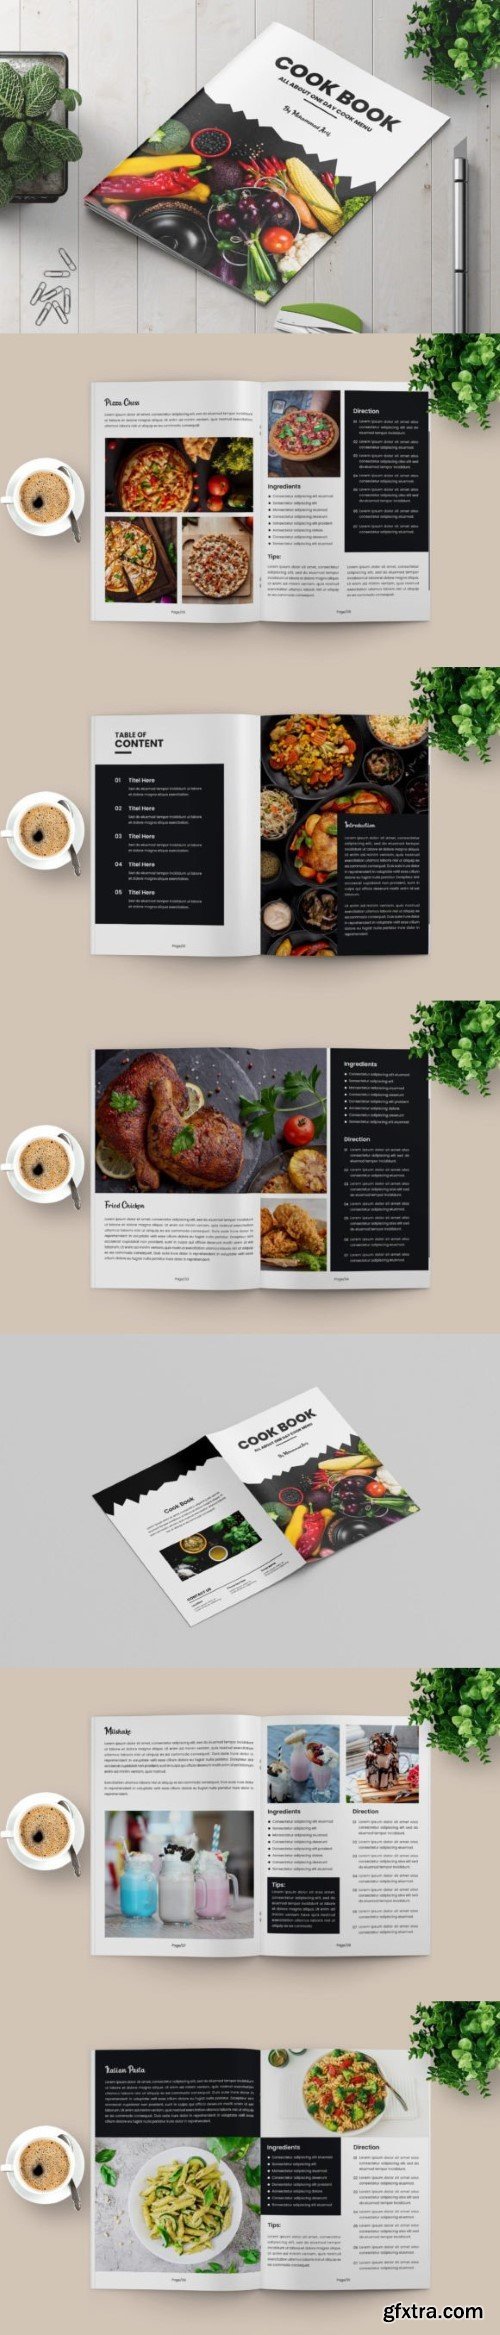 Cook book magazine layout template vector